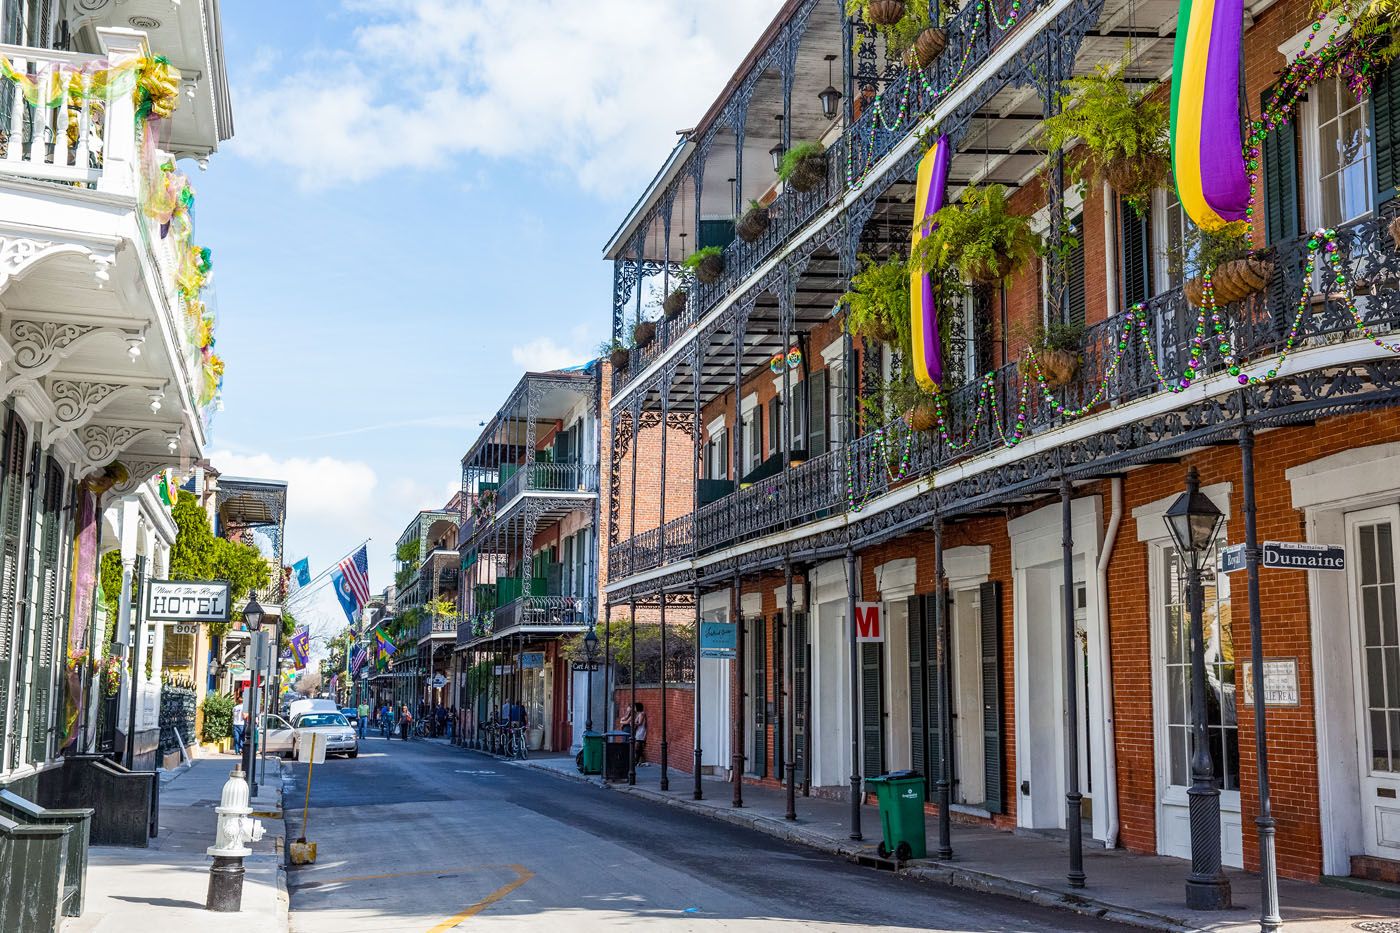 Royal Street New Orleans | Best Things to Do in New Orleans